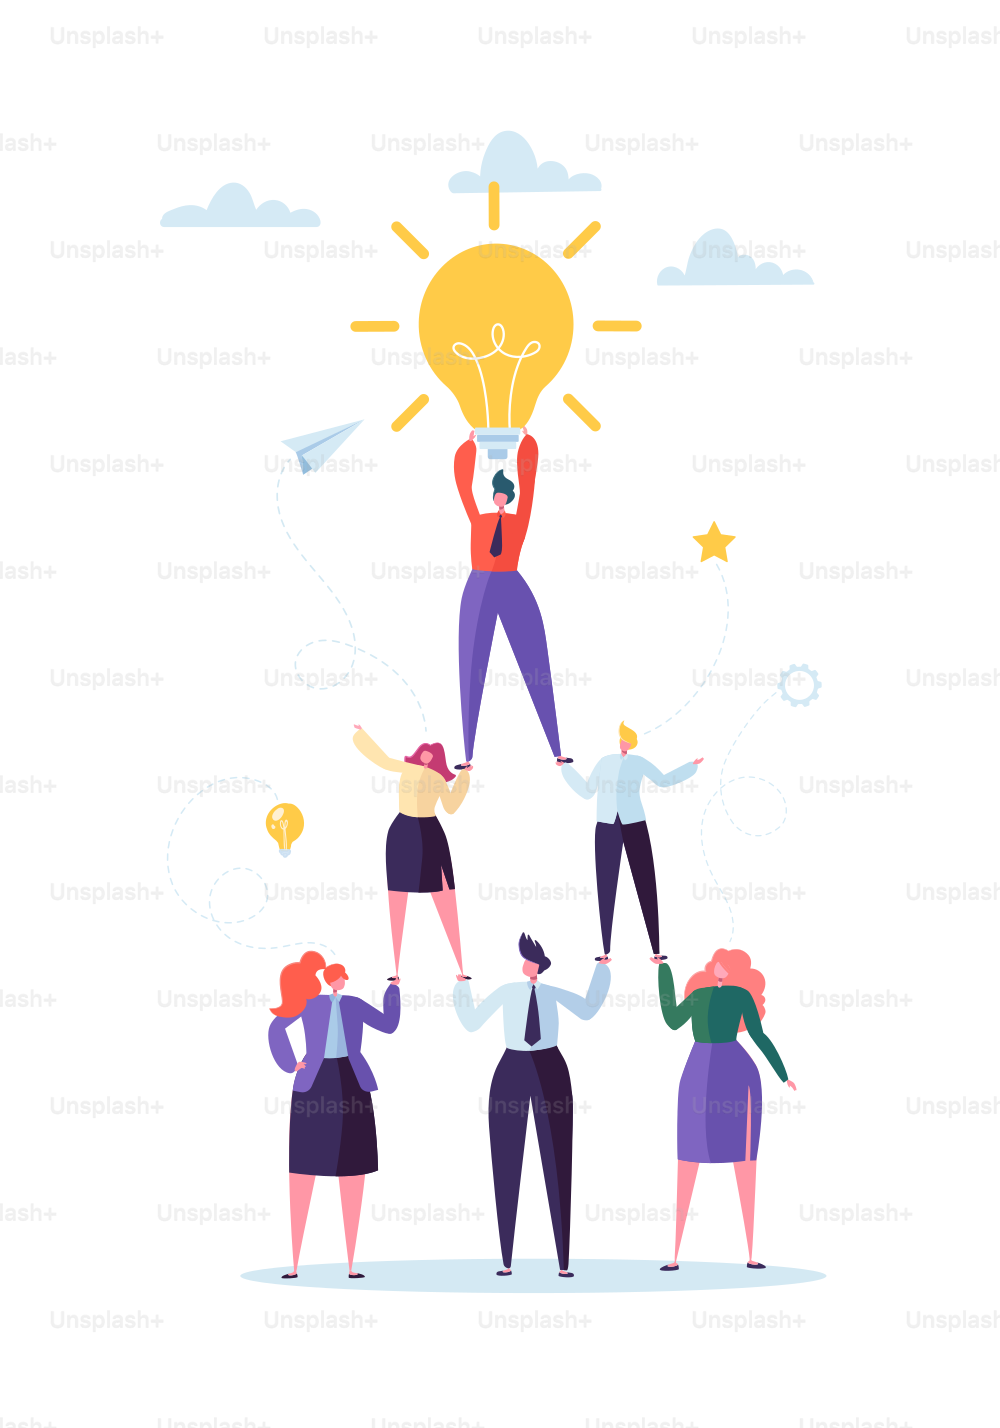 Successful Team Work Concept. Pyramid of Business People. Leader Holding Light Bulb on the Top. Leadership, Teamworking and Creative Idea. Vector illustration